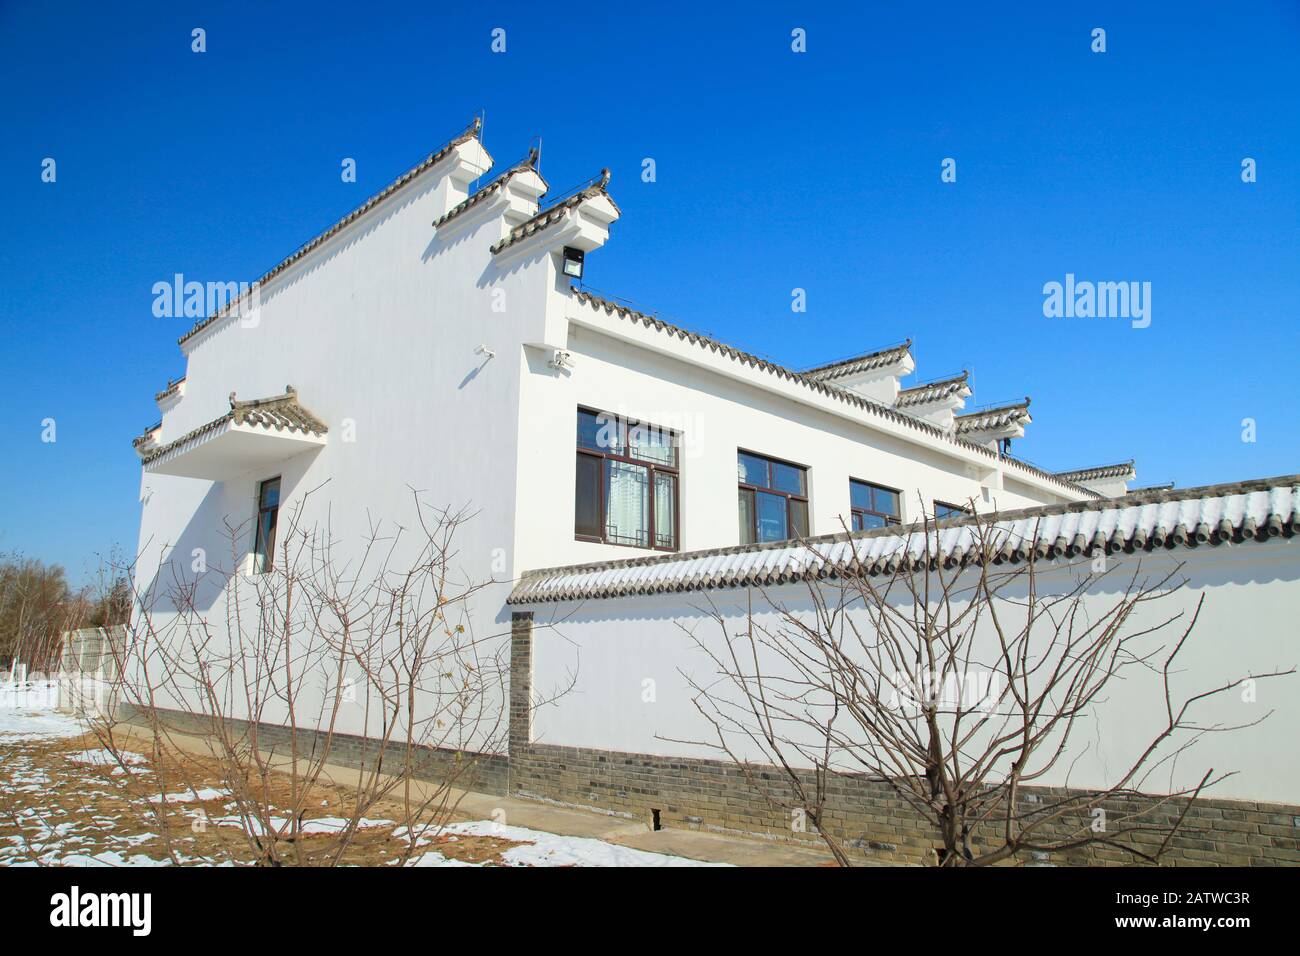 China has been gloriously enrolled buildings Stock Photo